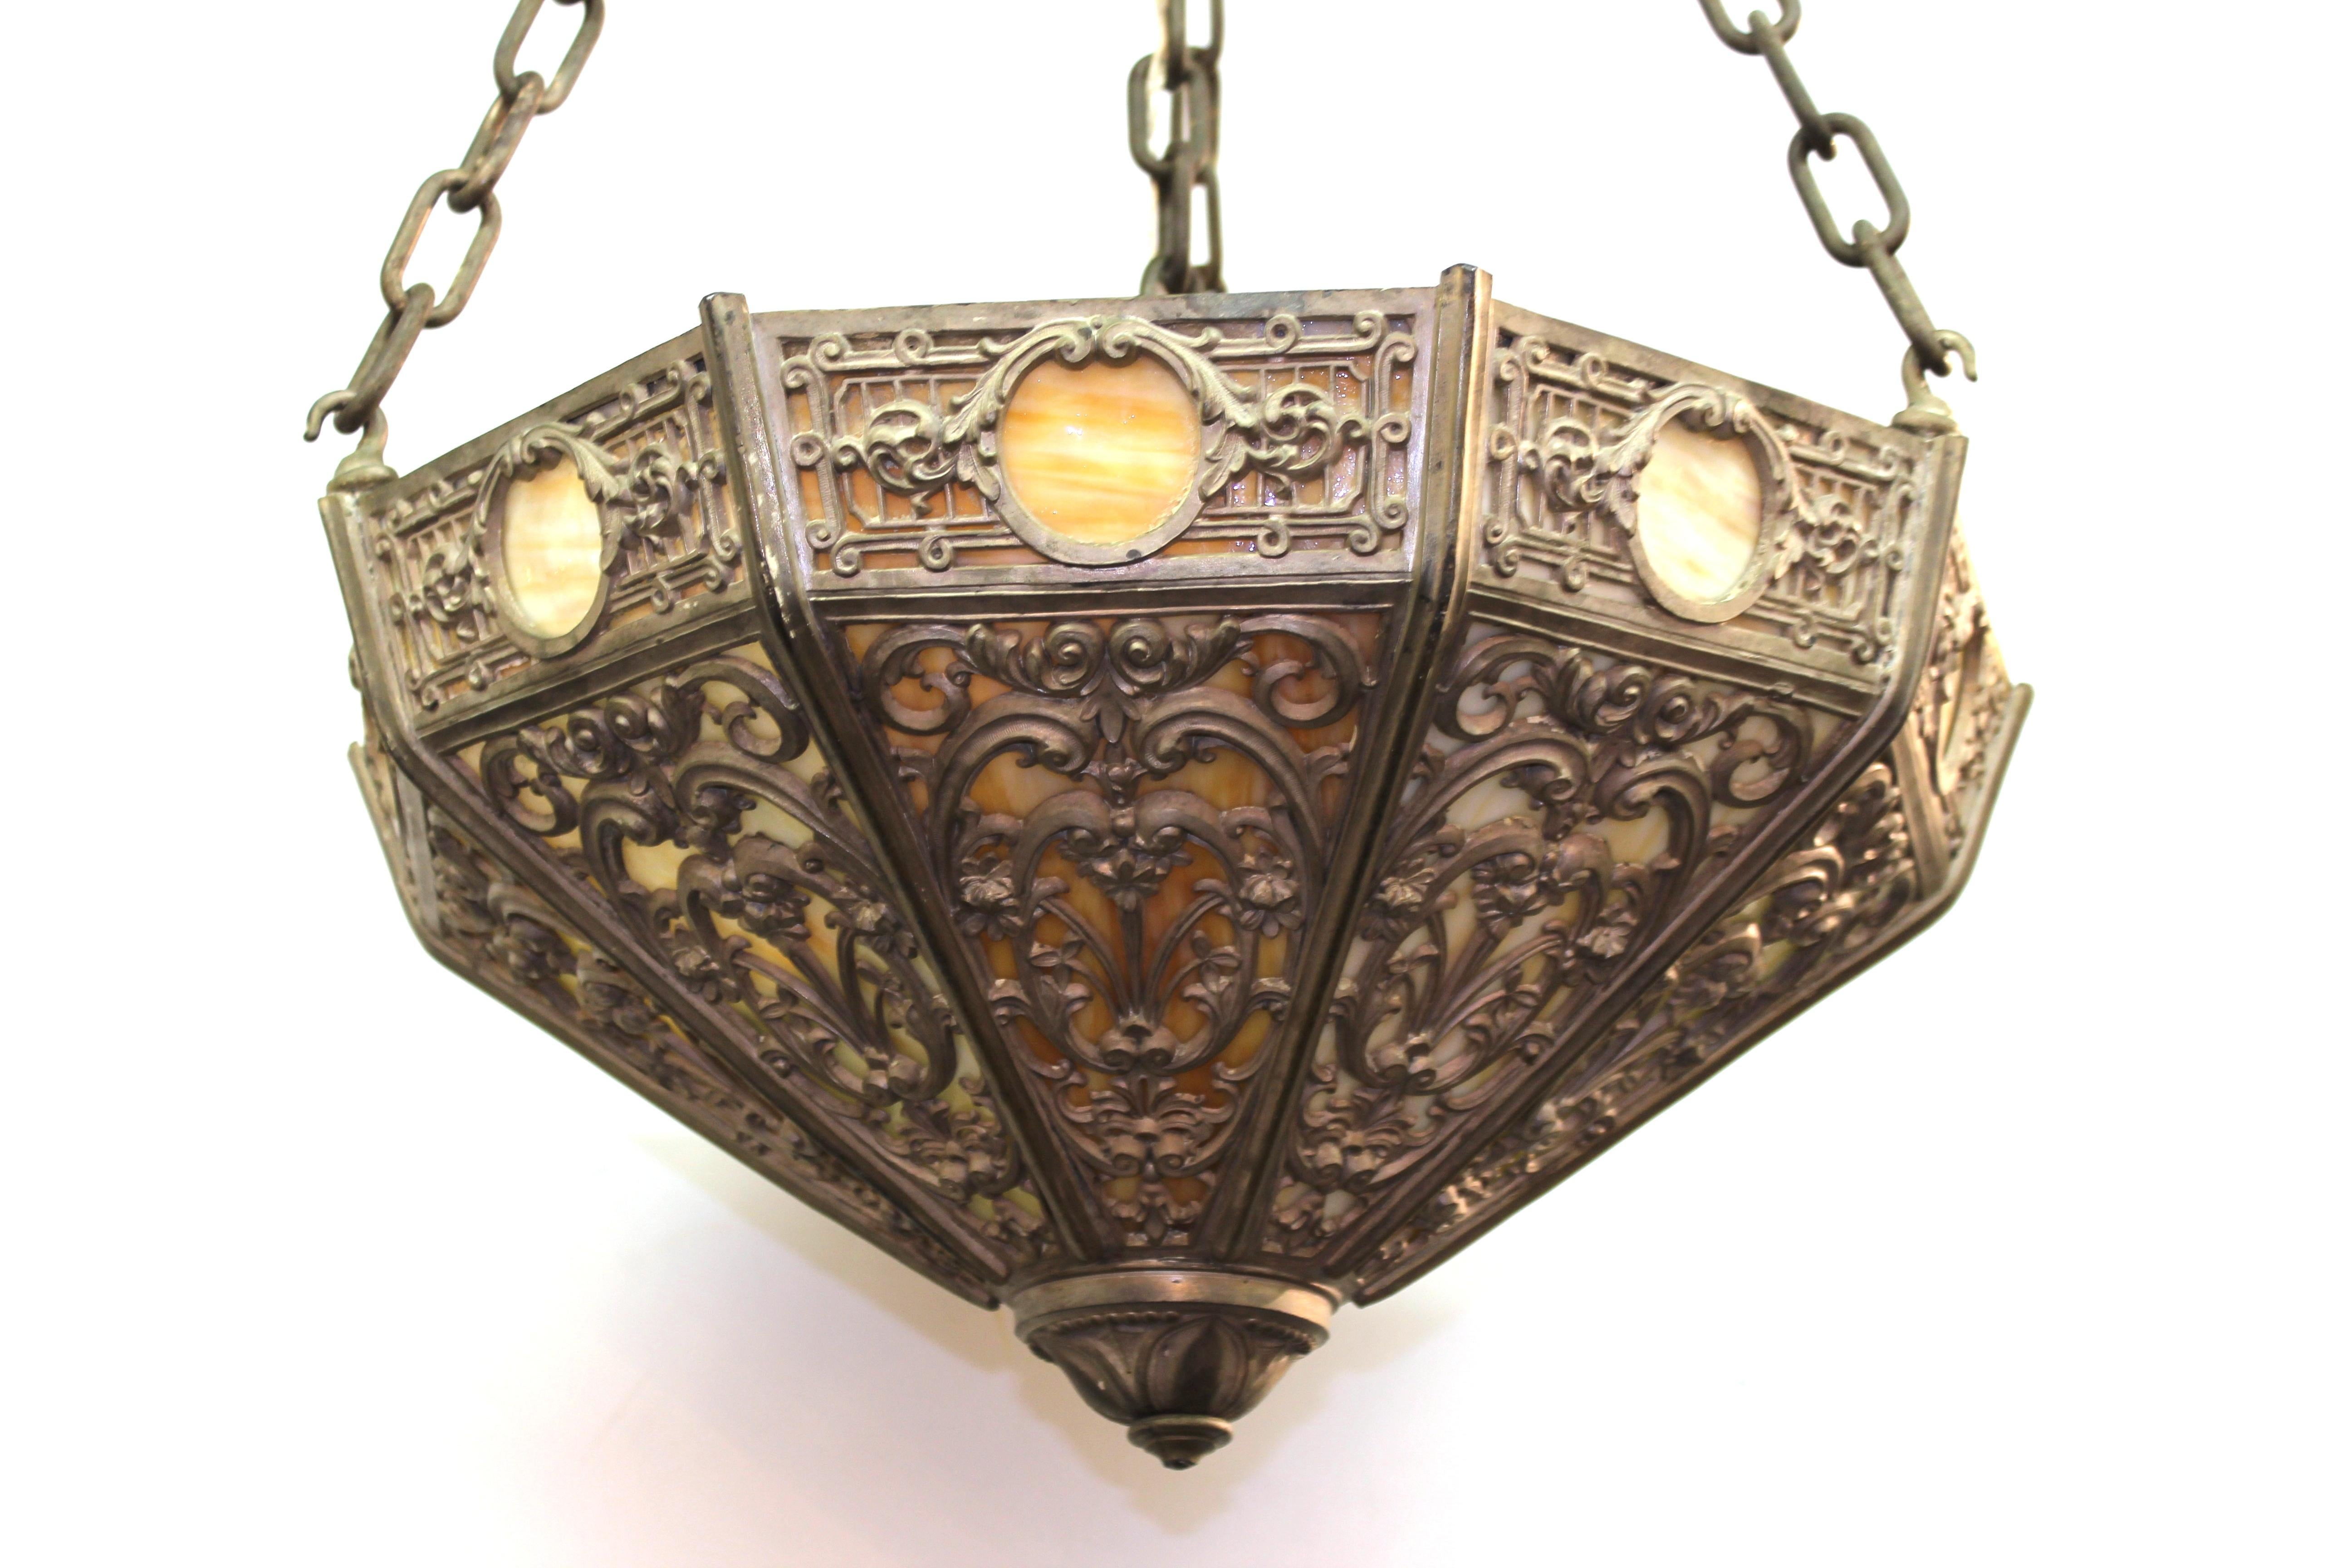 Renaissance Revival turn-of-the-century pendant with an elaborate metal frame designed with a decorative grotesque motif, with a back layer of marbled glass panels. The piece was made in the United States during the late Victorian era and has